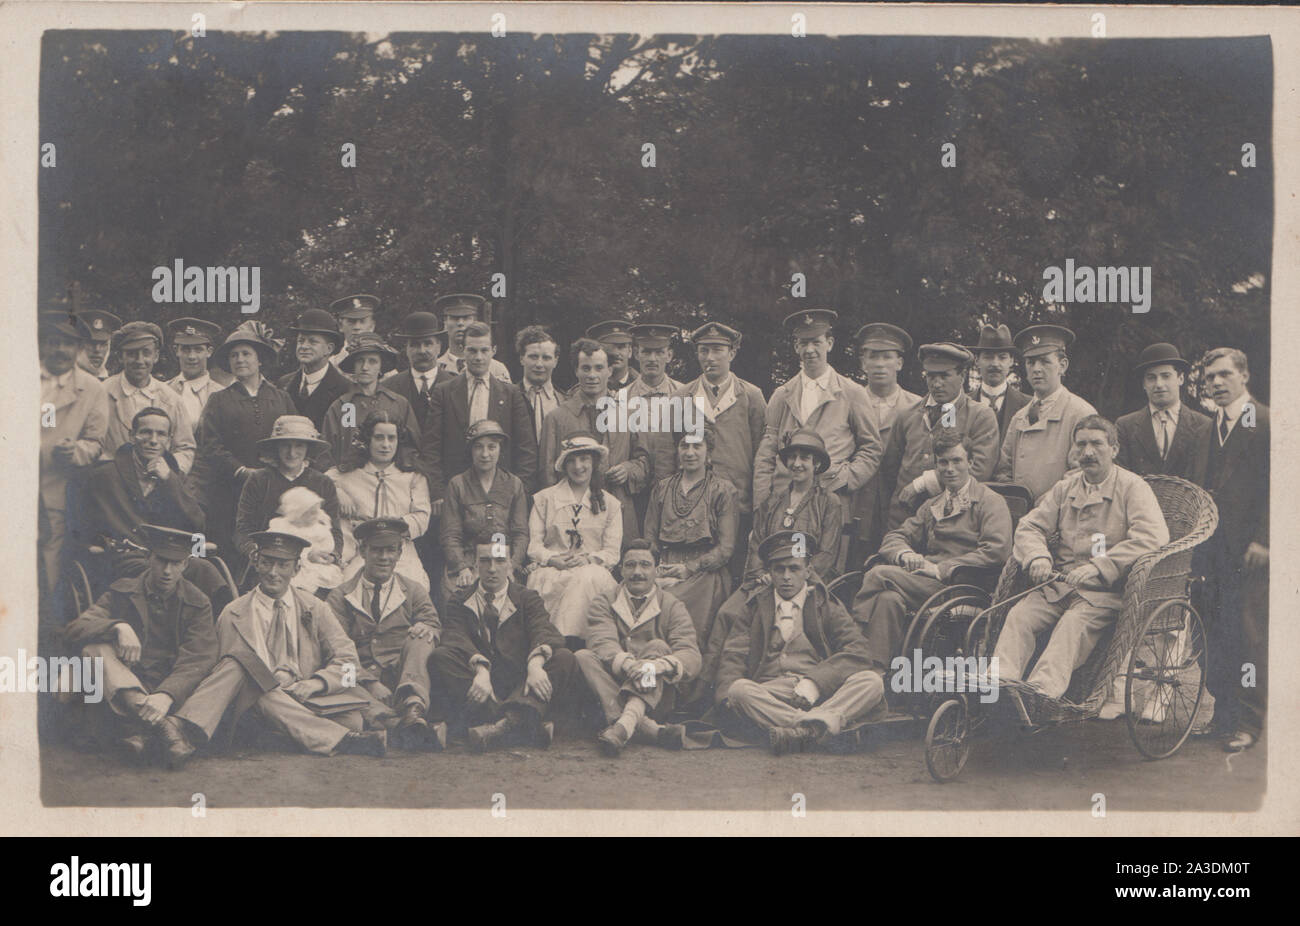 Vintage Early 20th Century Photographic Postcard Showing a Group of Injured and Sick WW1 British Army Soldiers. One of Soldiers is in a Wheelchair. Stock Photo